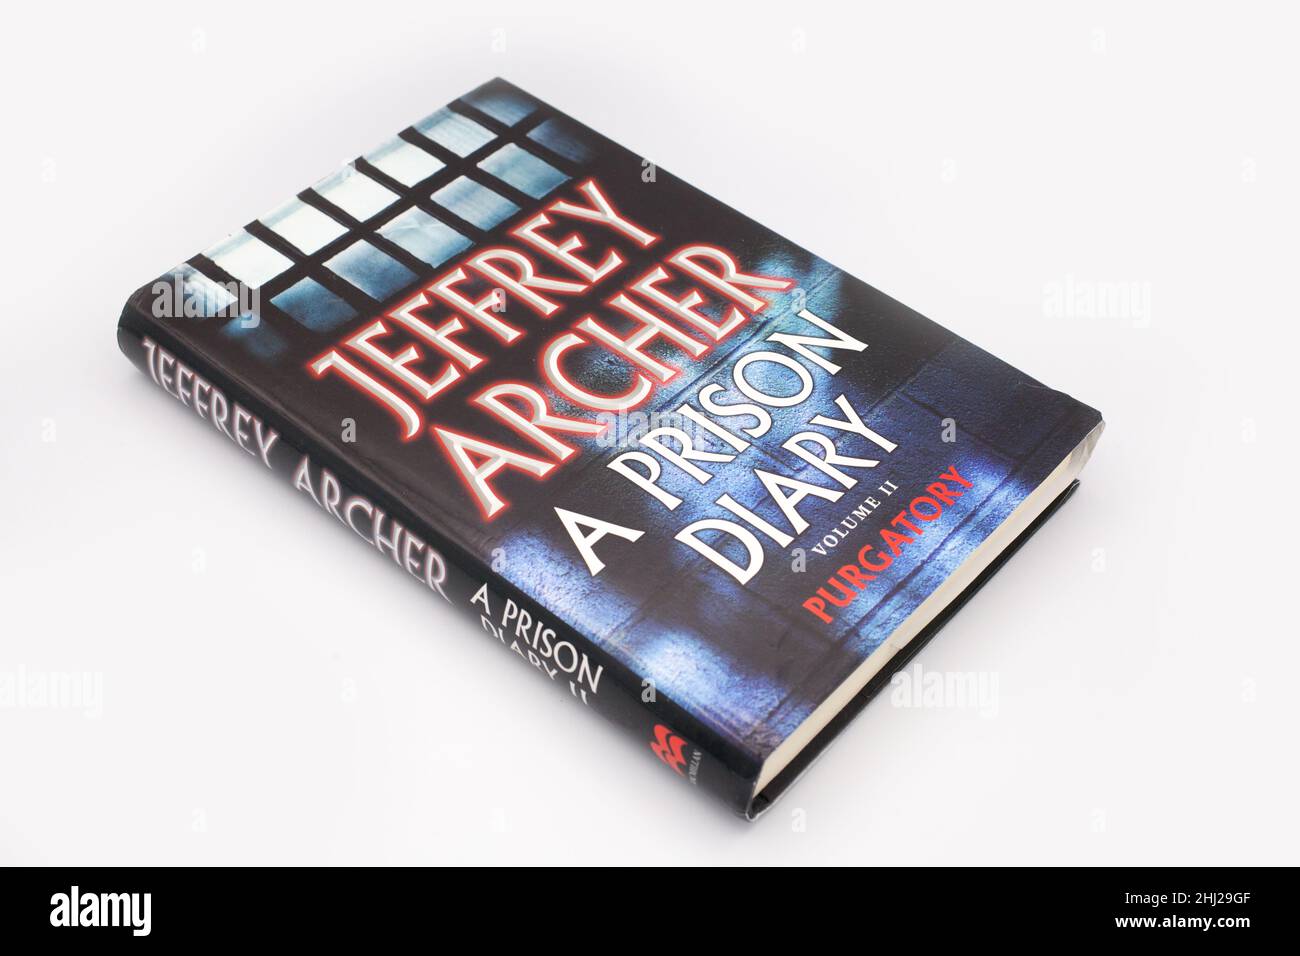 The book, A Prison Diary by Jeffrey Archer Stock Photo